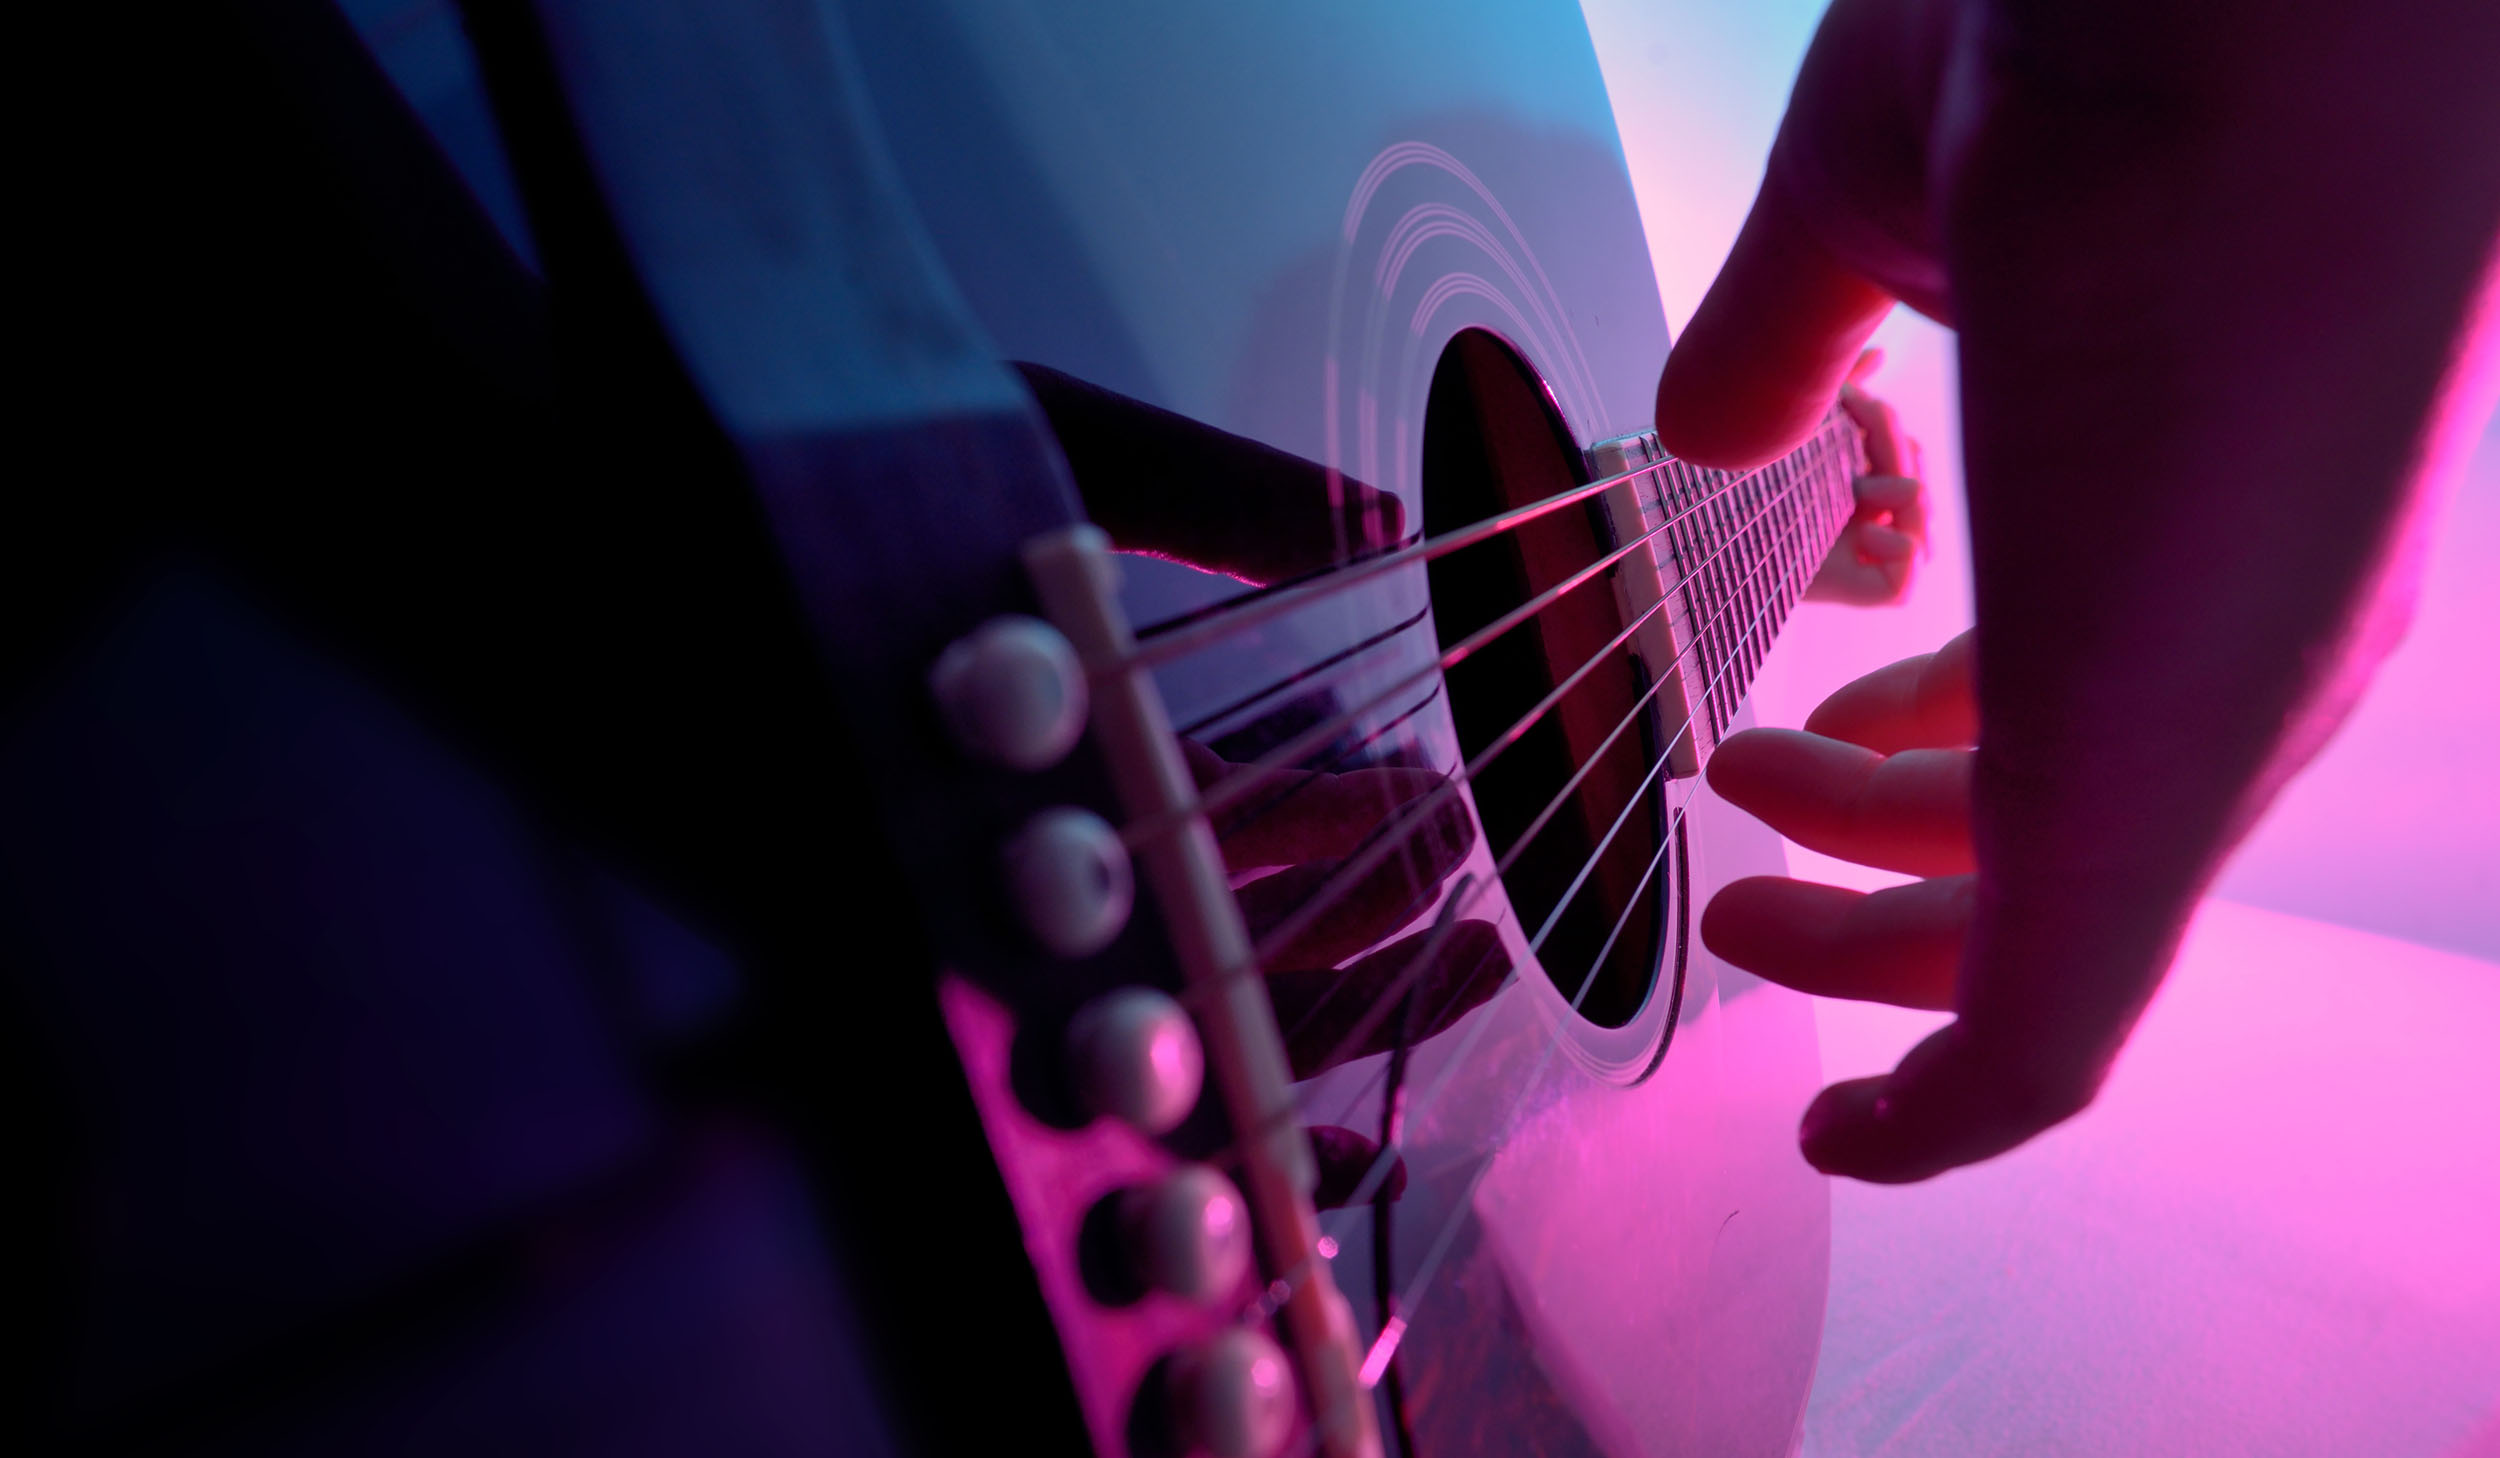 Acoustic guitar played by a girl in colorful lights